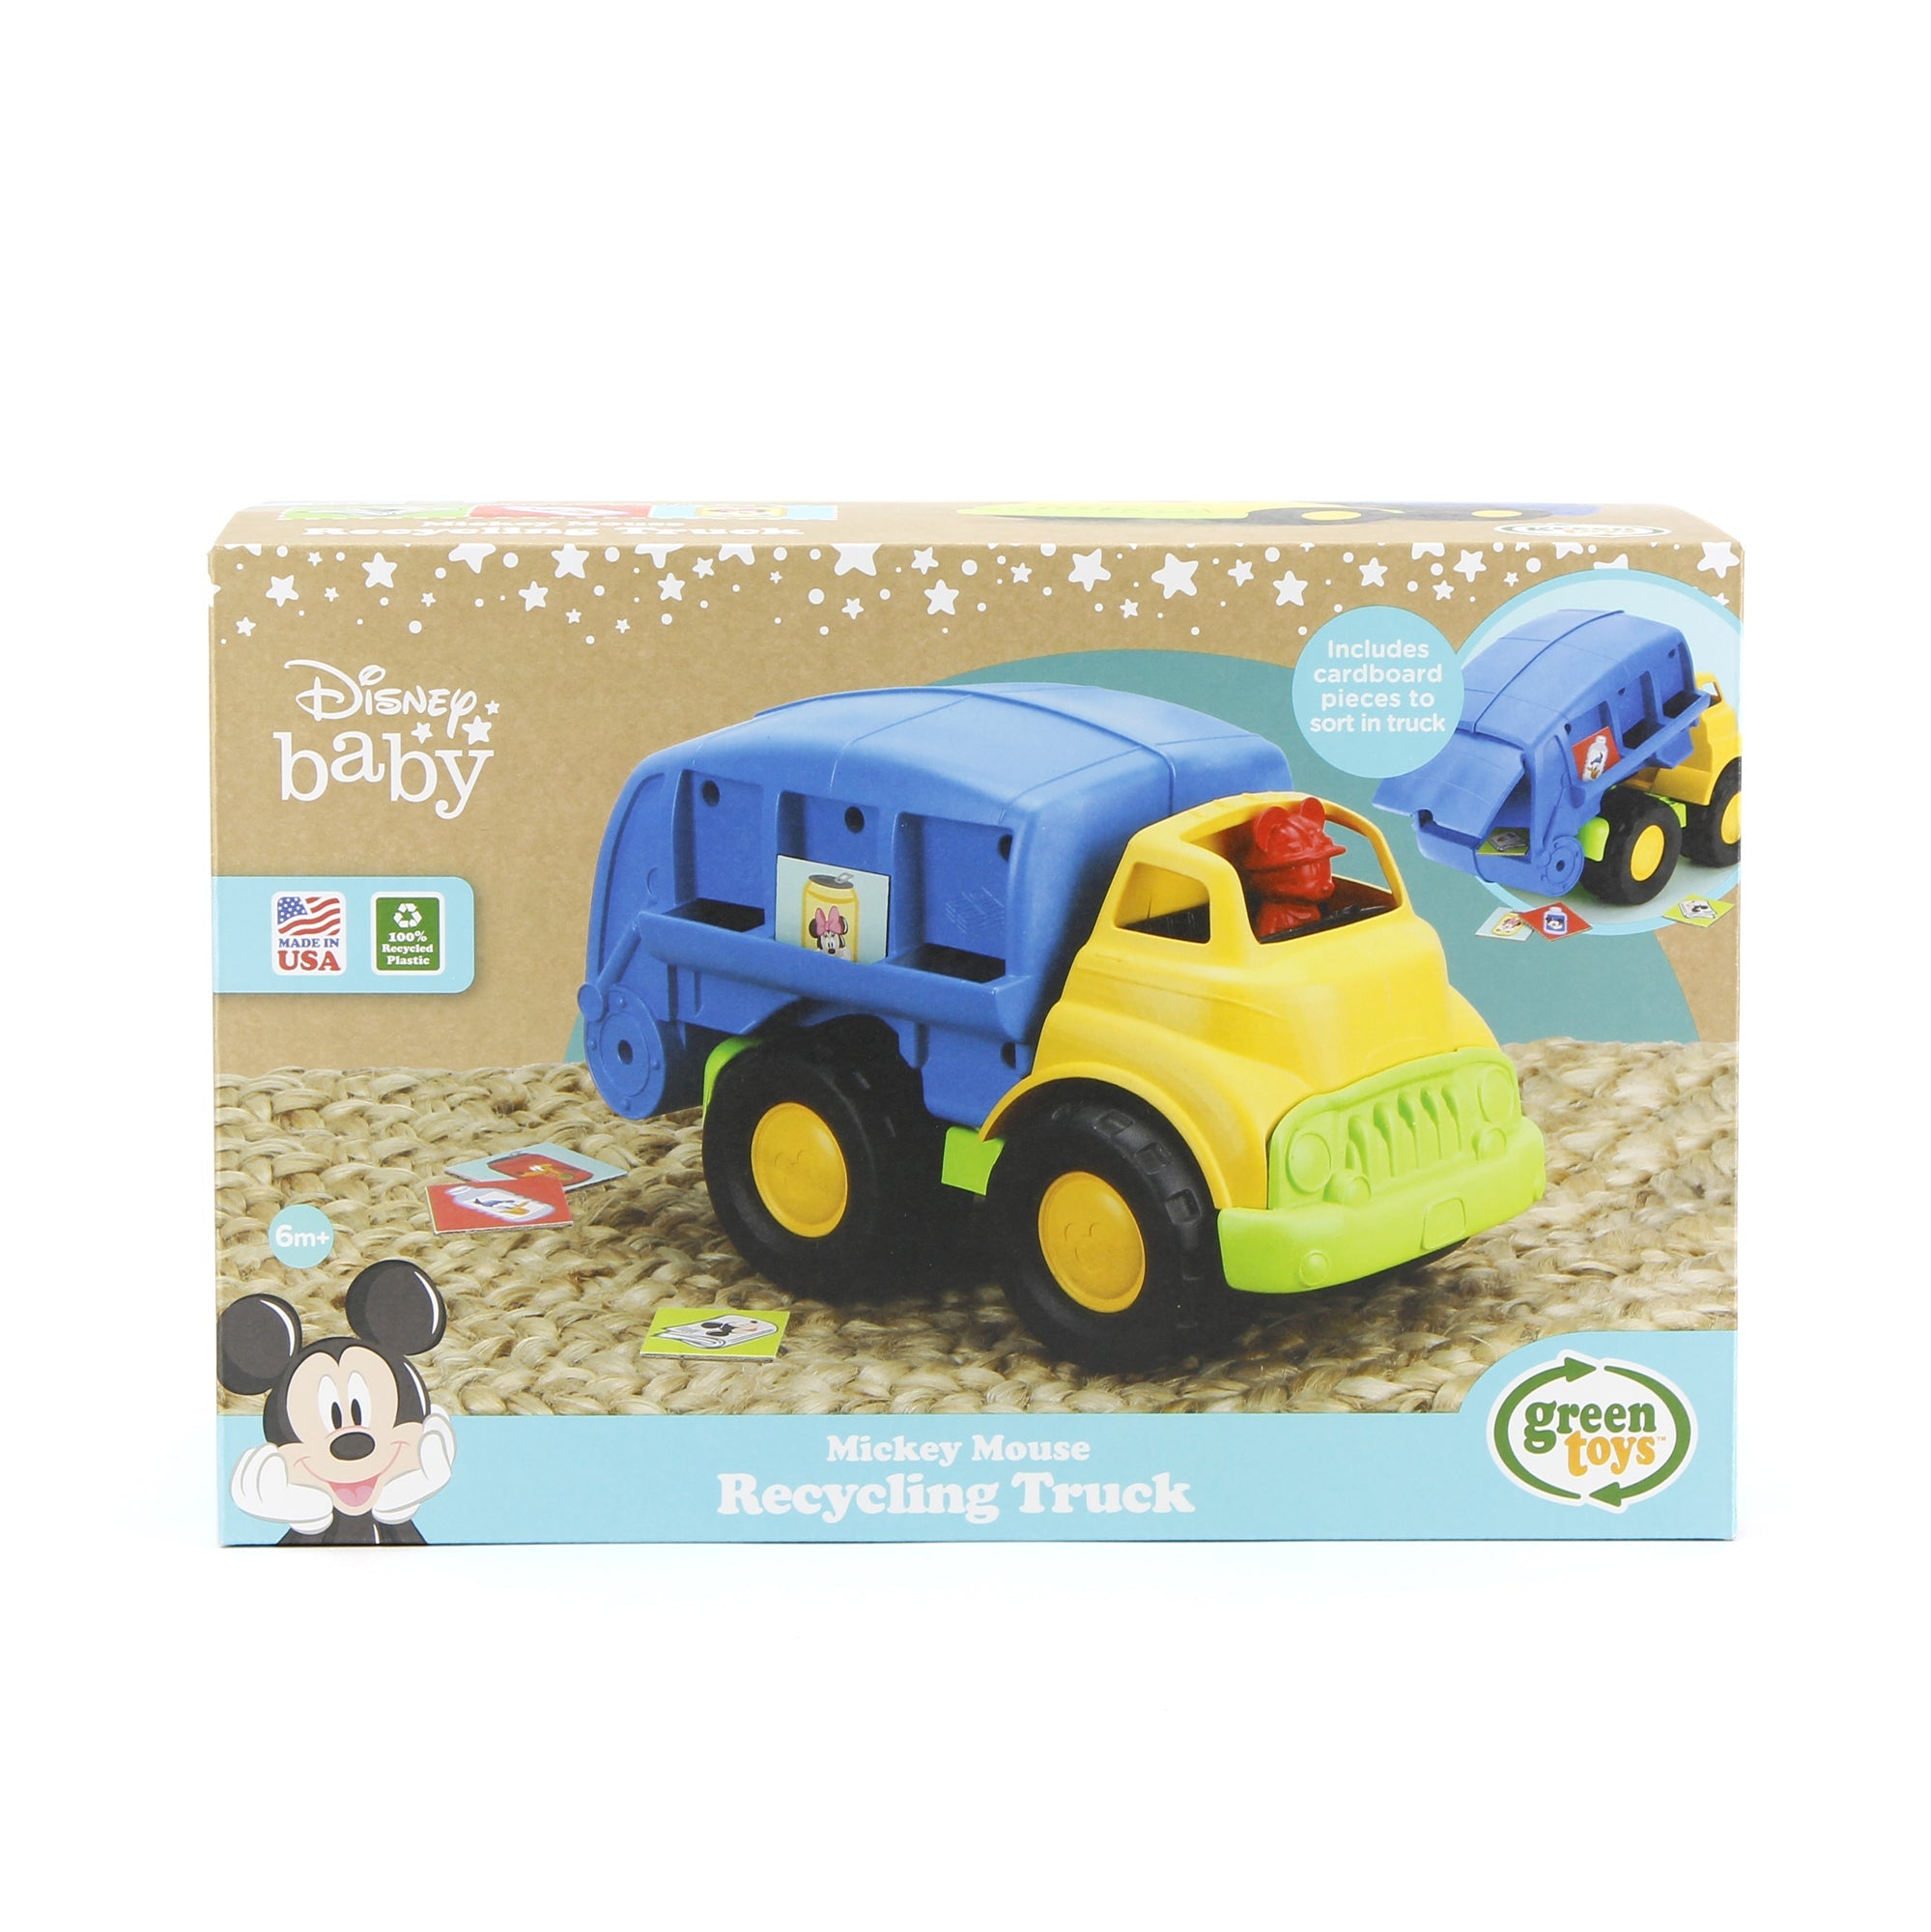 MICKEY MOUSE RECYCLING TRUCK